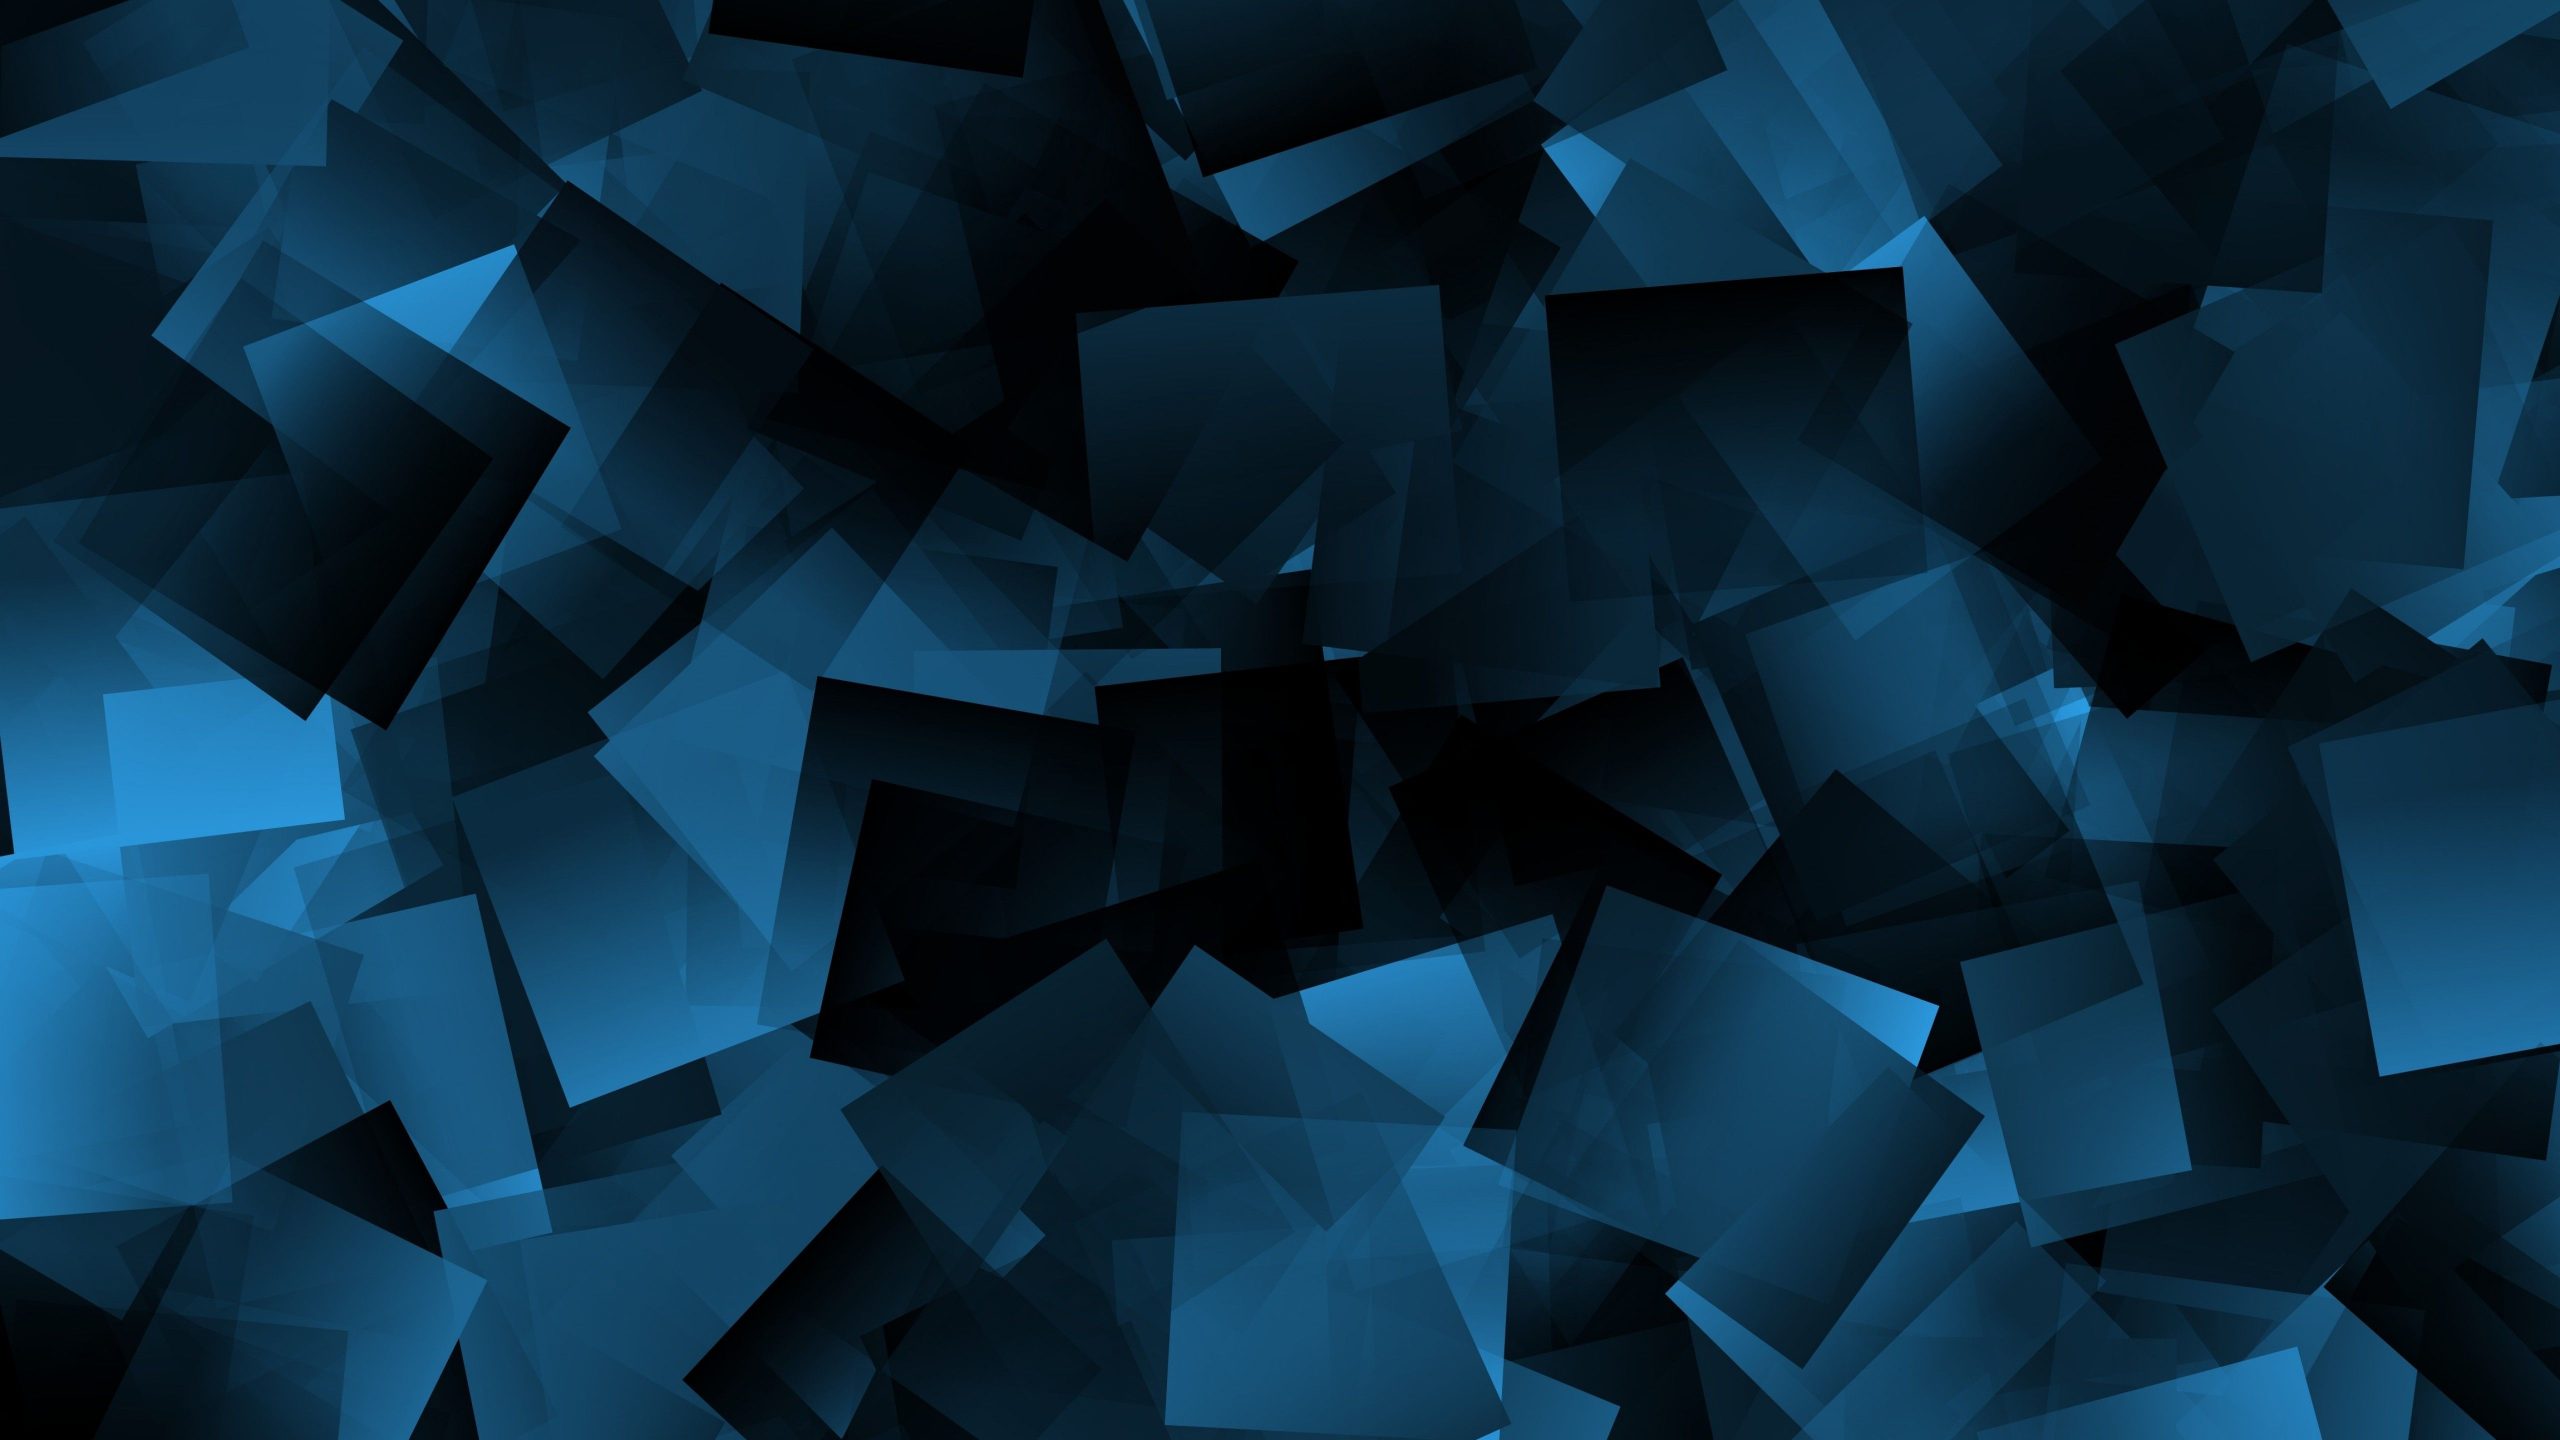 4K Blue Wallpaper, Abstract, Blue, Blue 4K, Download, Free, Wallpaper, Wallpaper pc, wallpapers 4K, wallpapers Laptop - 4K Blue Abstract Wallpaper Free Download PC